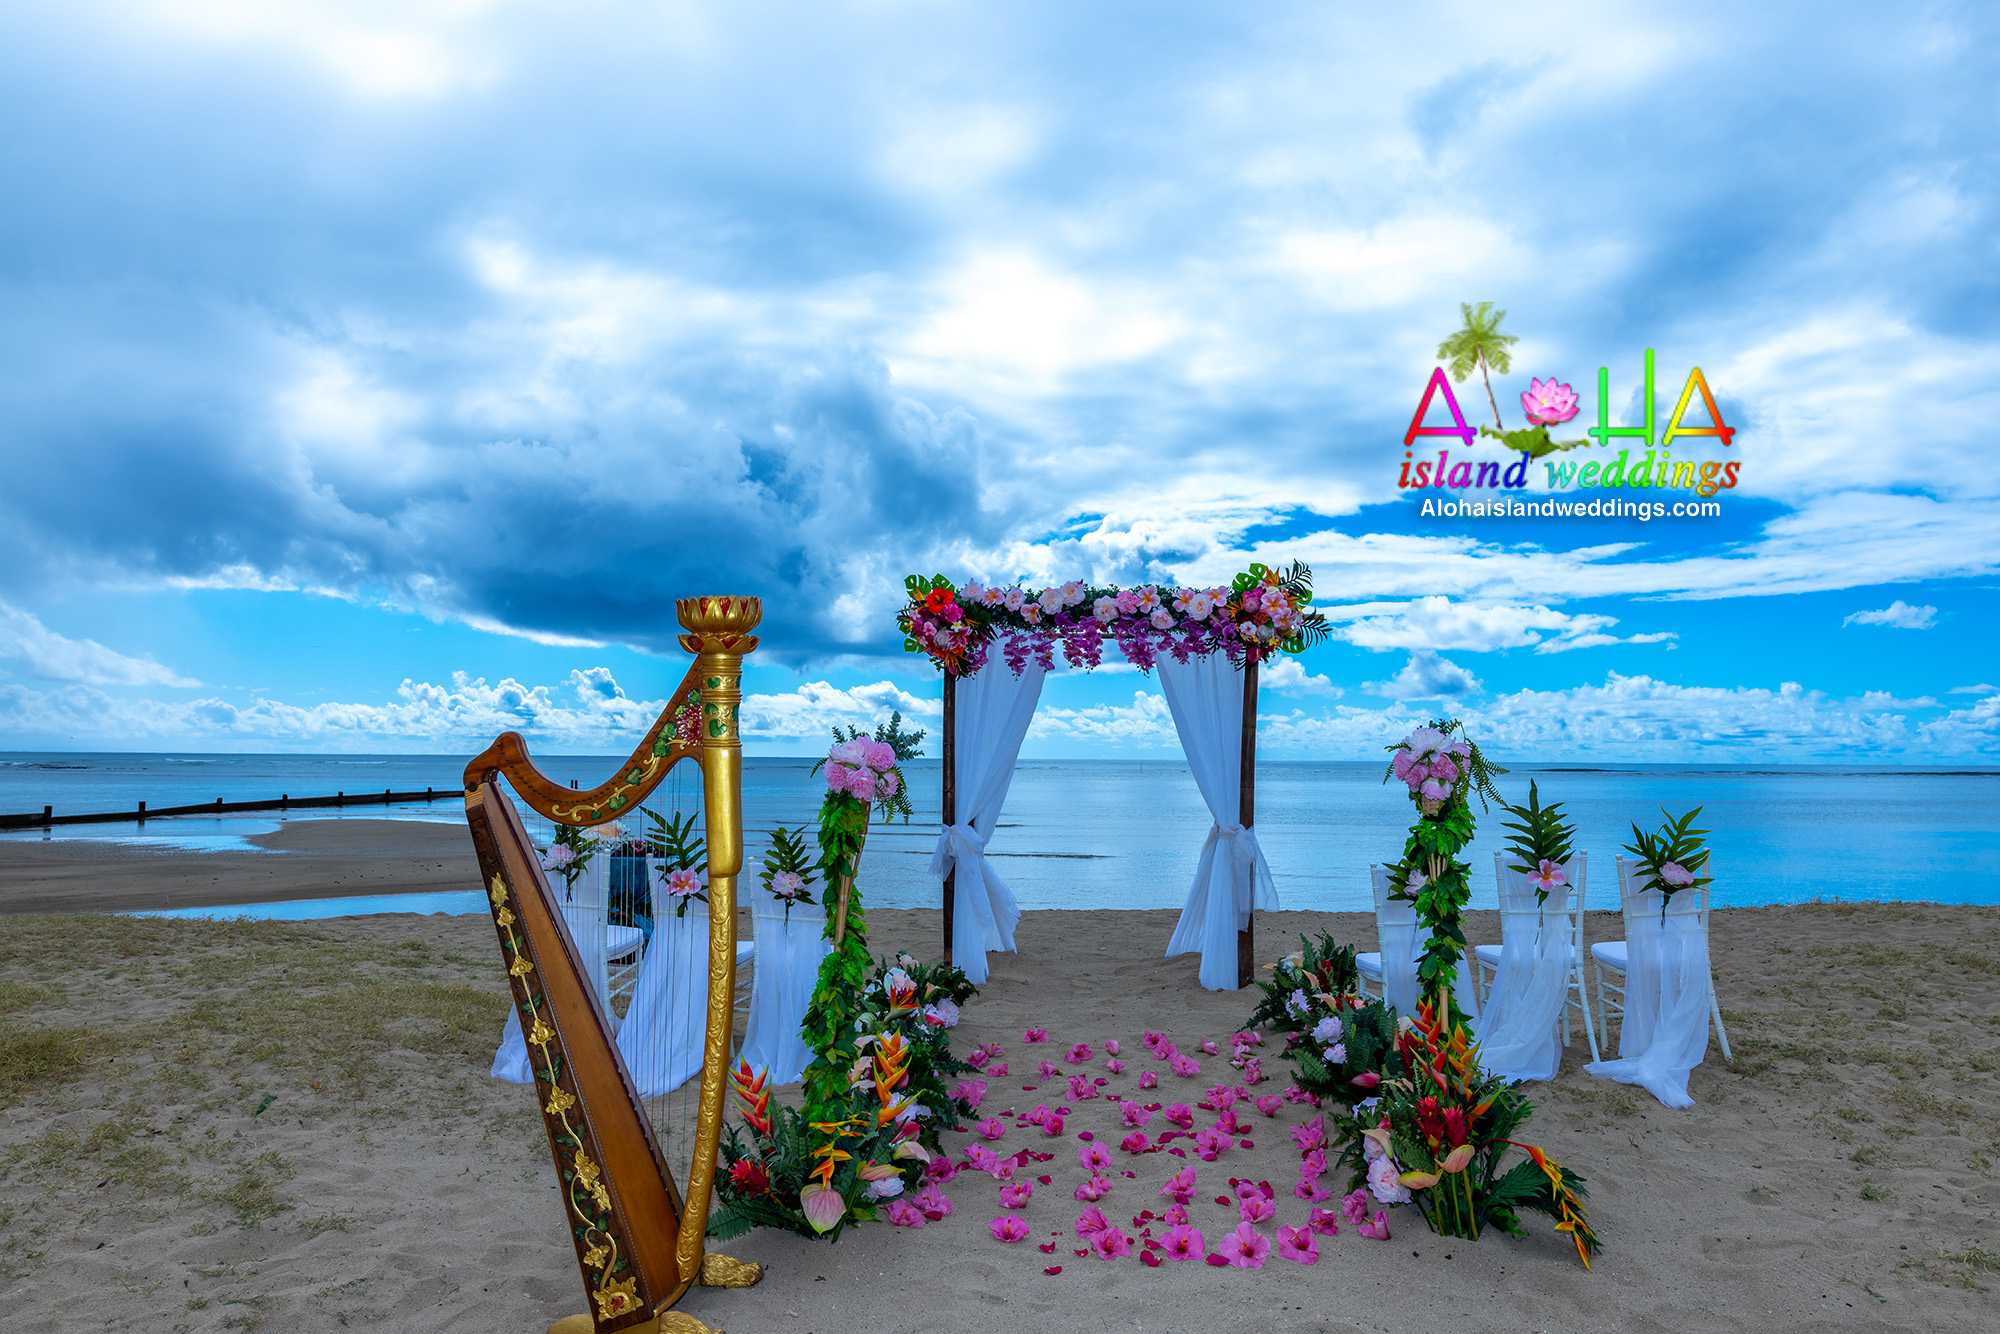 Golden Renaissance harp in Hawaii awaits for the wedding to begin on the beach of Oahu , Tropical Hawaiian florals line the pathway